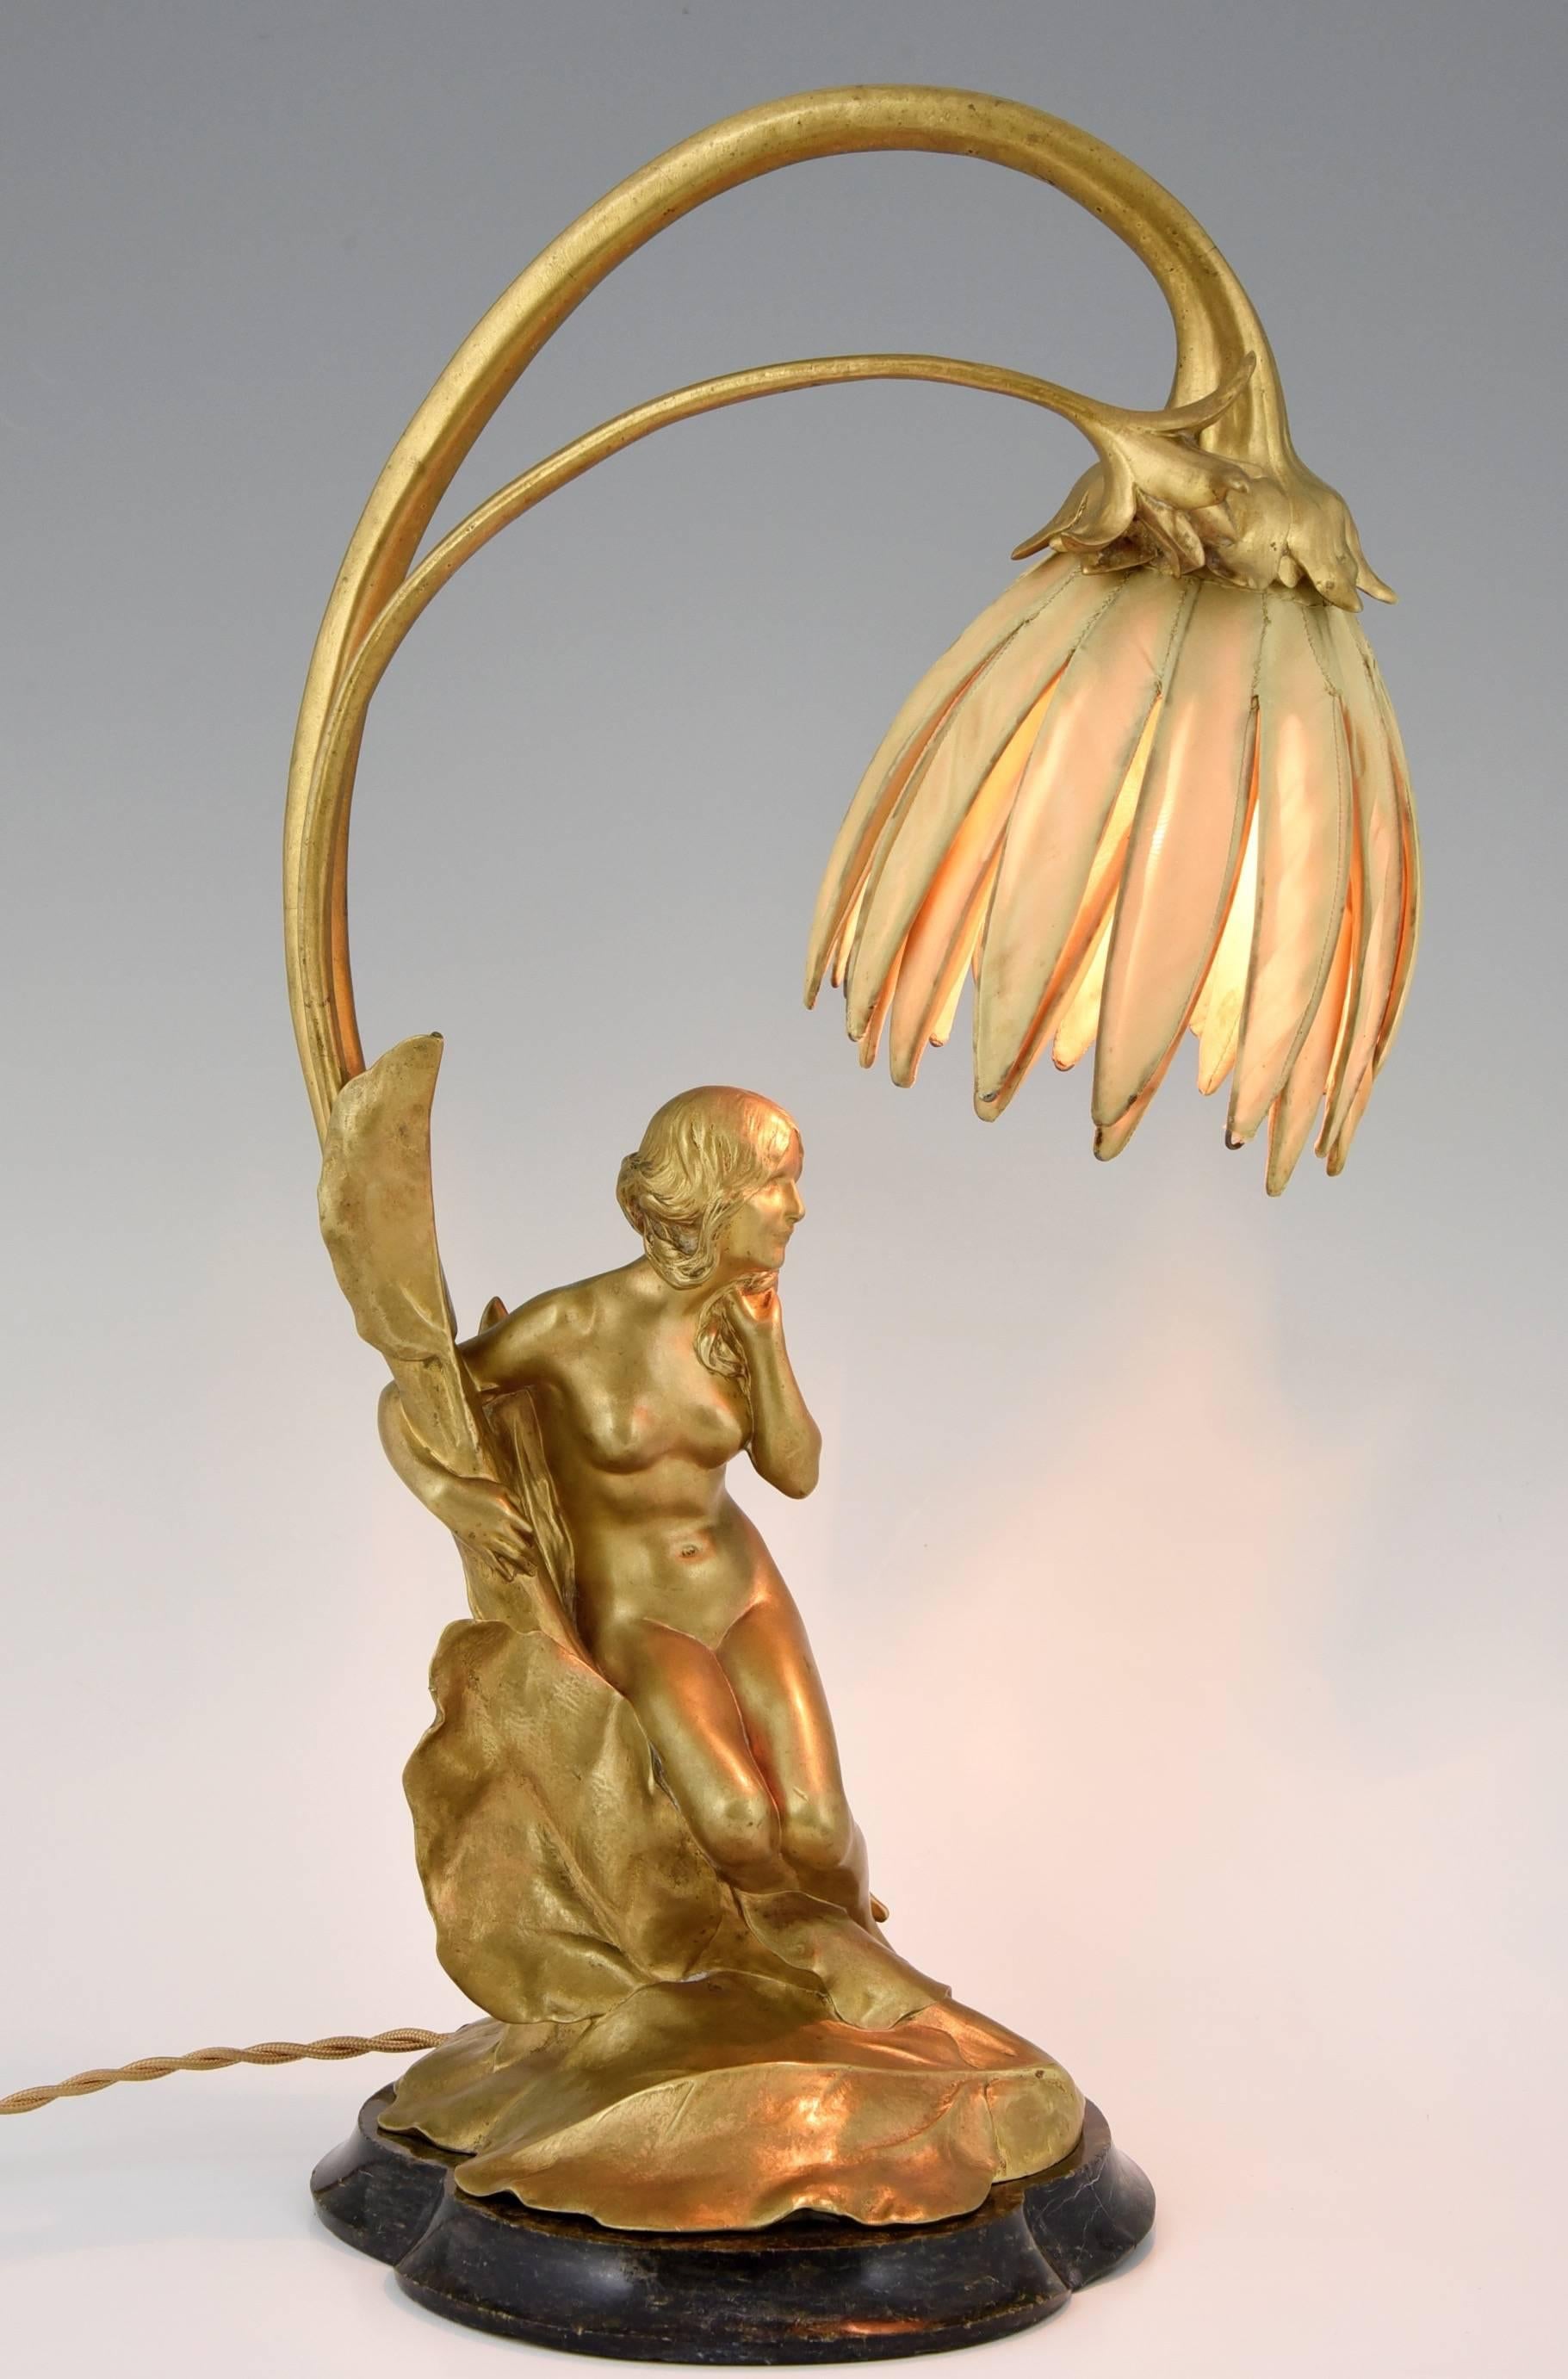 An Art Nouveau gilt bronze lamp in the shape of a flower with a seated nude.
By Maurice Bouval. Born in Toulouse (1863-1916).
Foundry seal Colin.
Material:  gilt bronze.  Marble base.  Original shade.
Origin:  France.

Size: 
H. 19 inch x L.